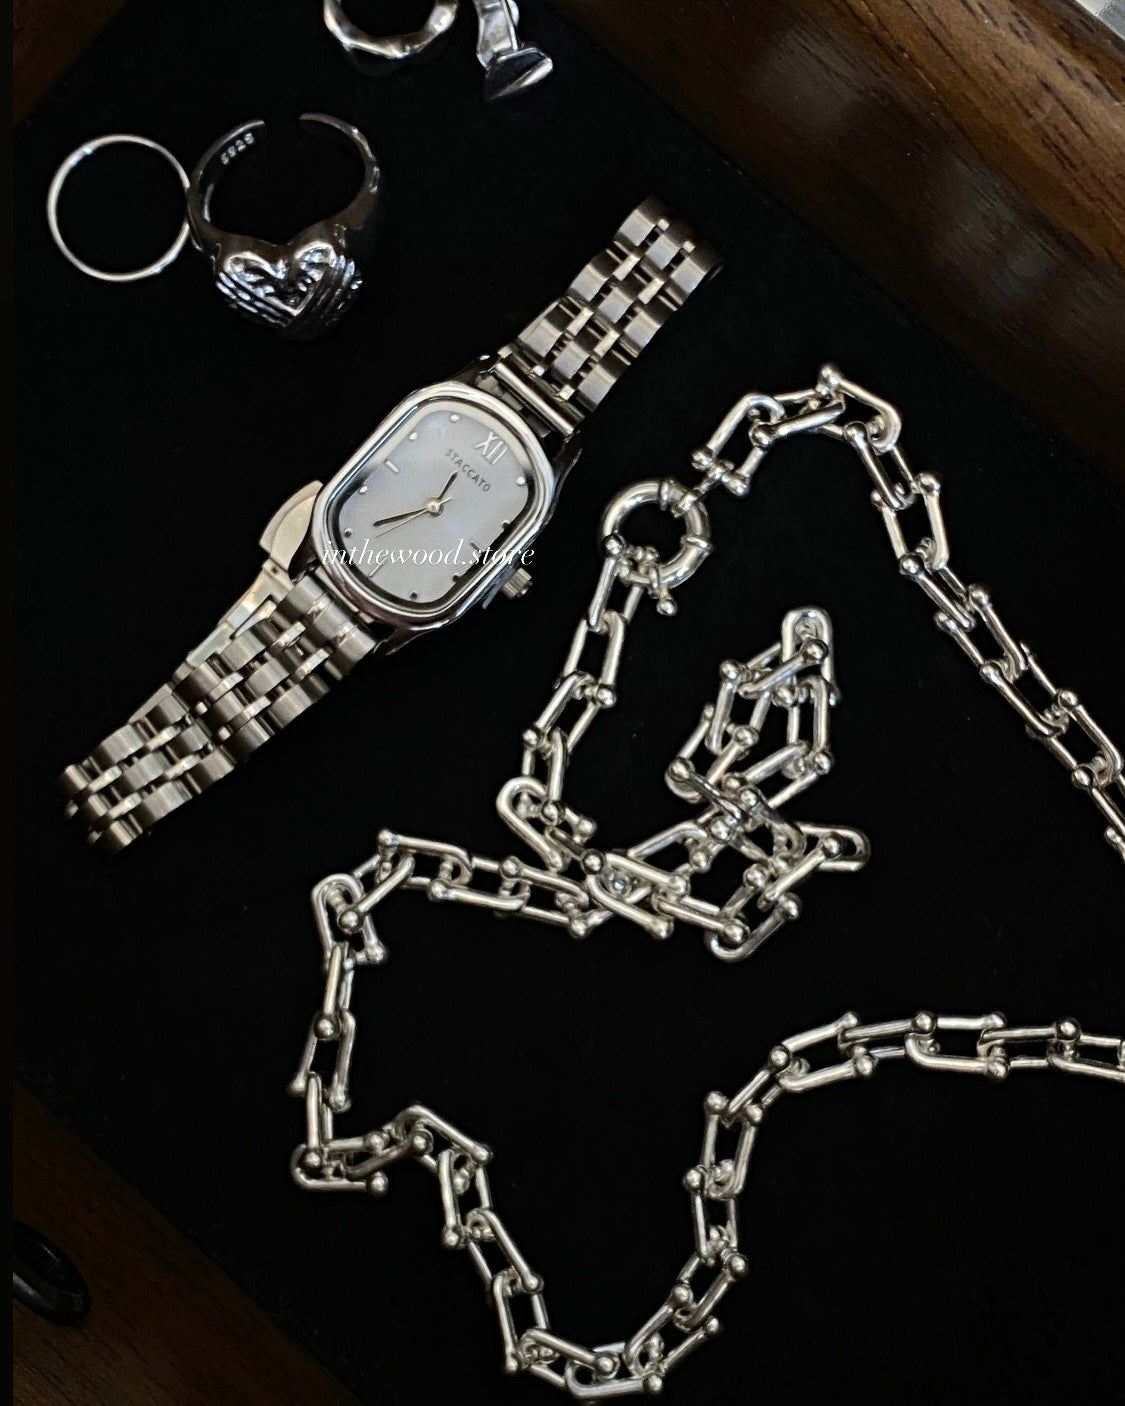 [925silver] Buckle Chain Necklace